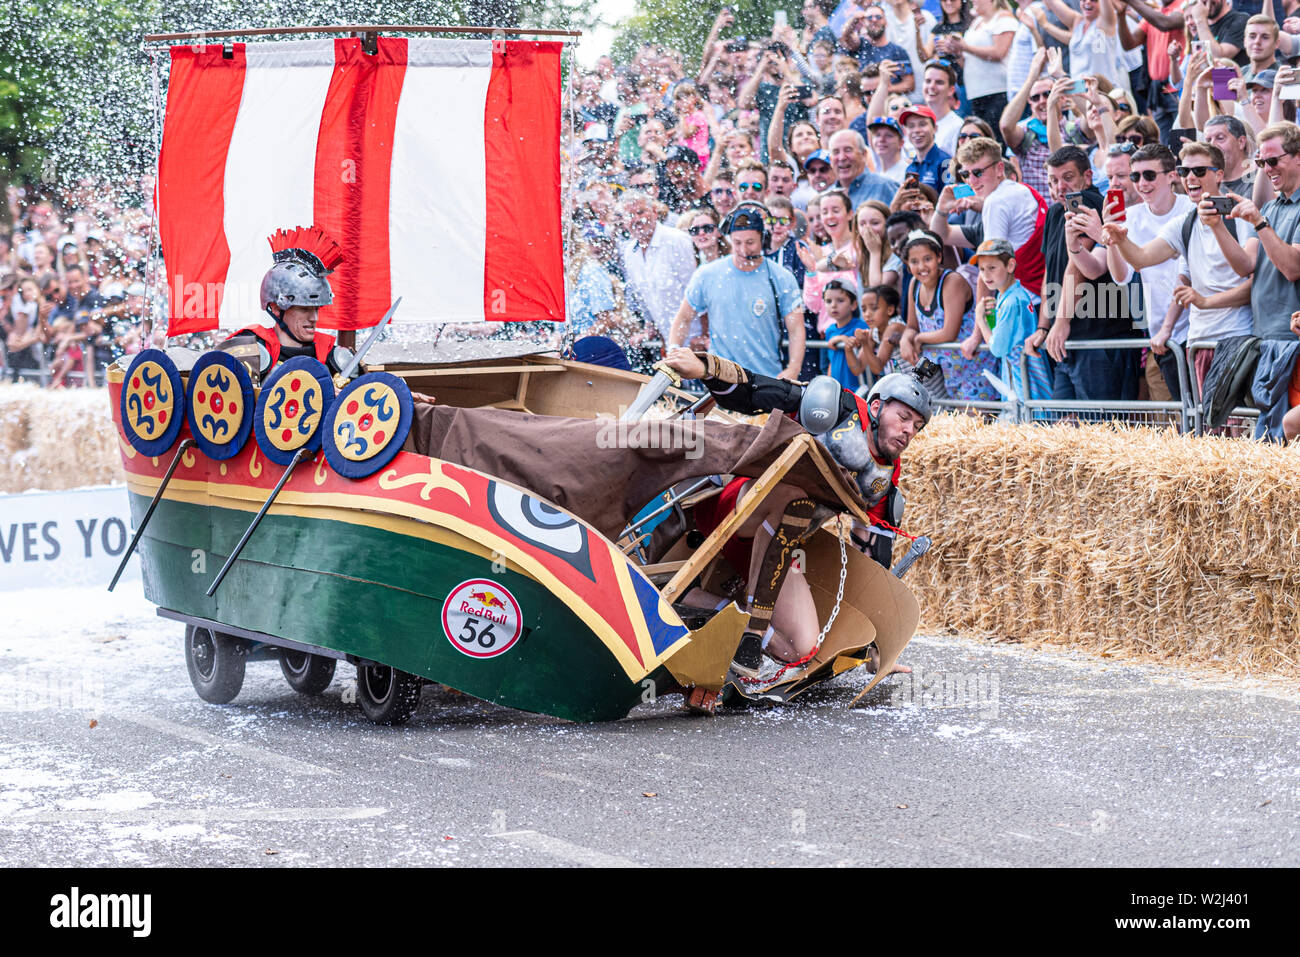 Emperor Barbus Bacterius and the Nautilus competing in the Red Bull Soapbox Race 2019 at Alexandra Park, London, UK. Falling apart landing over ramp Stock Photo